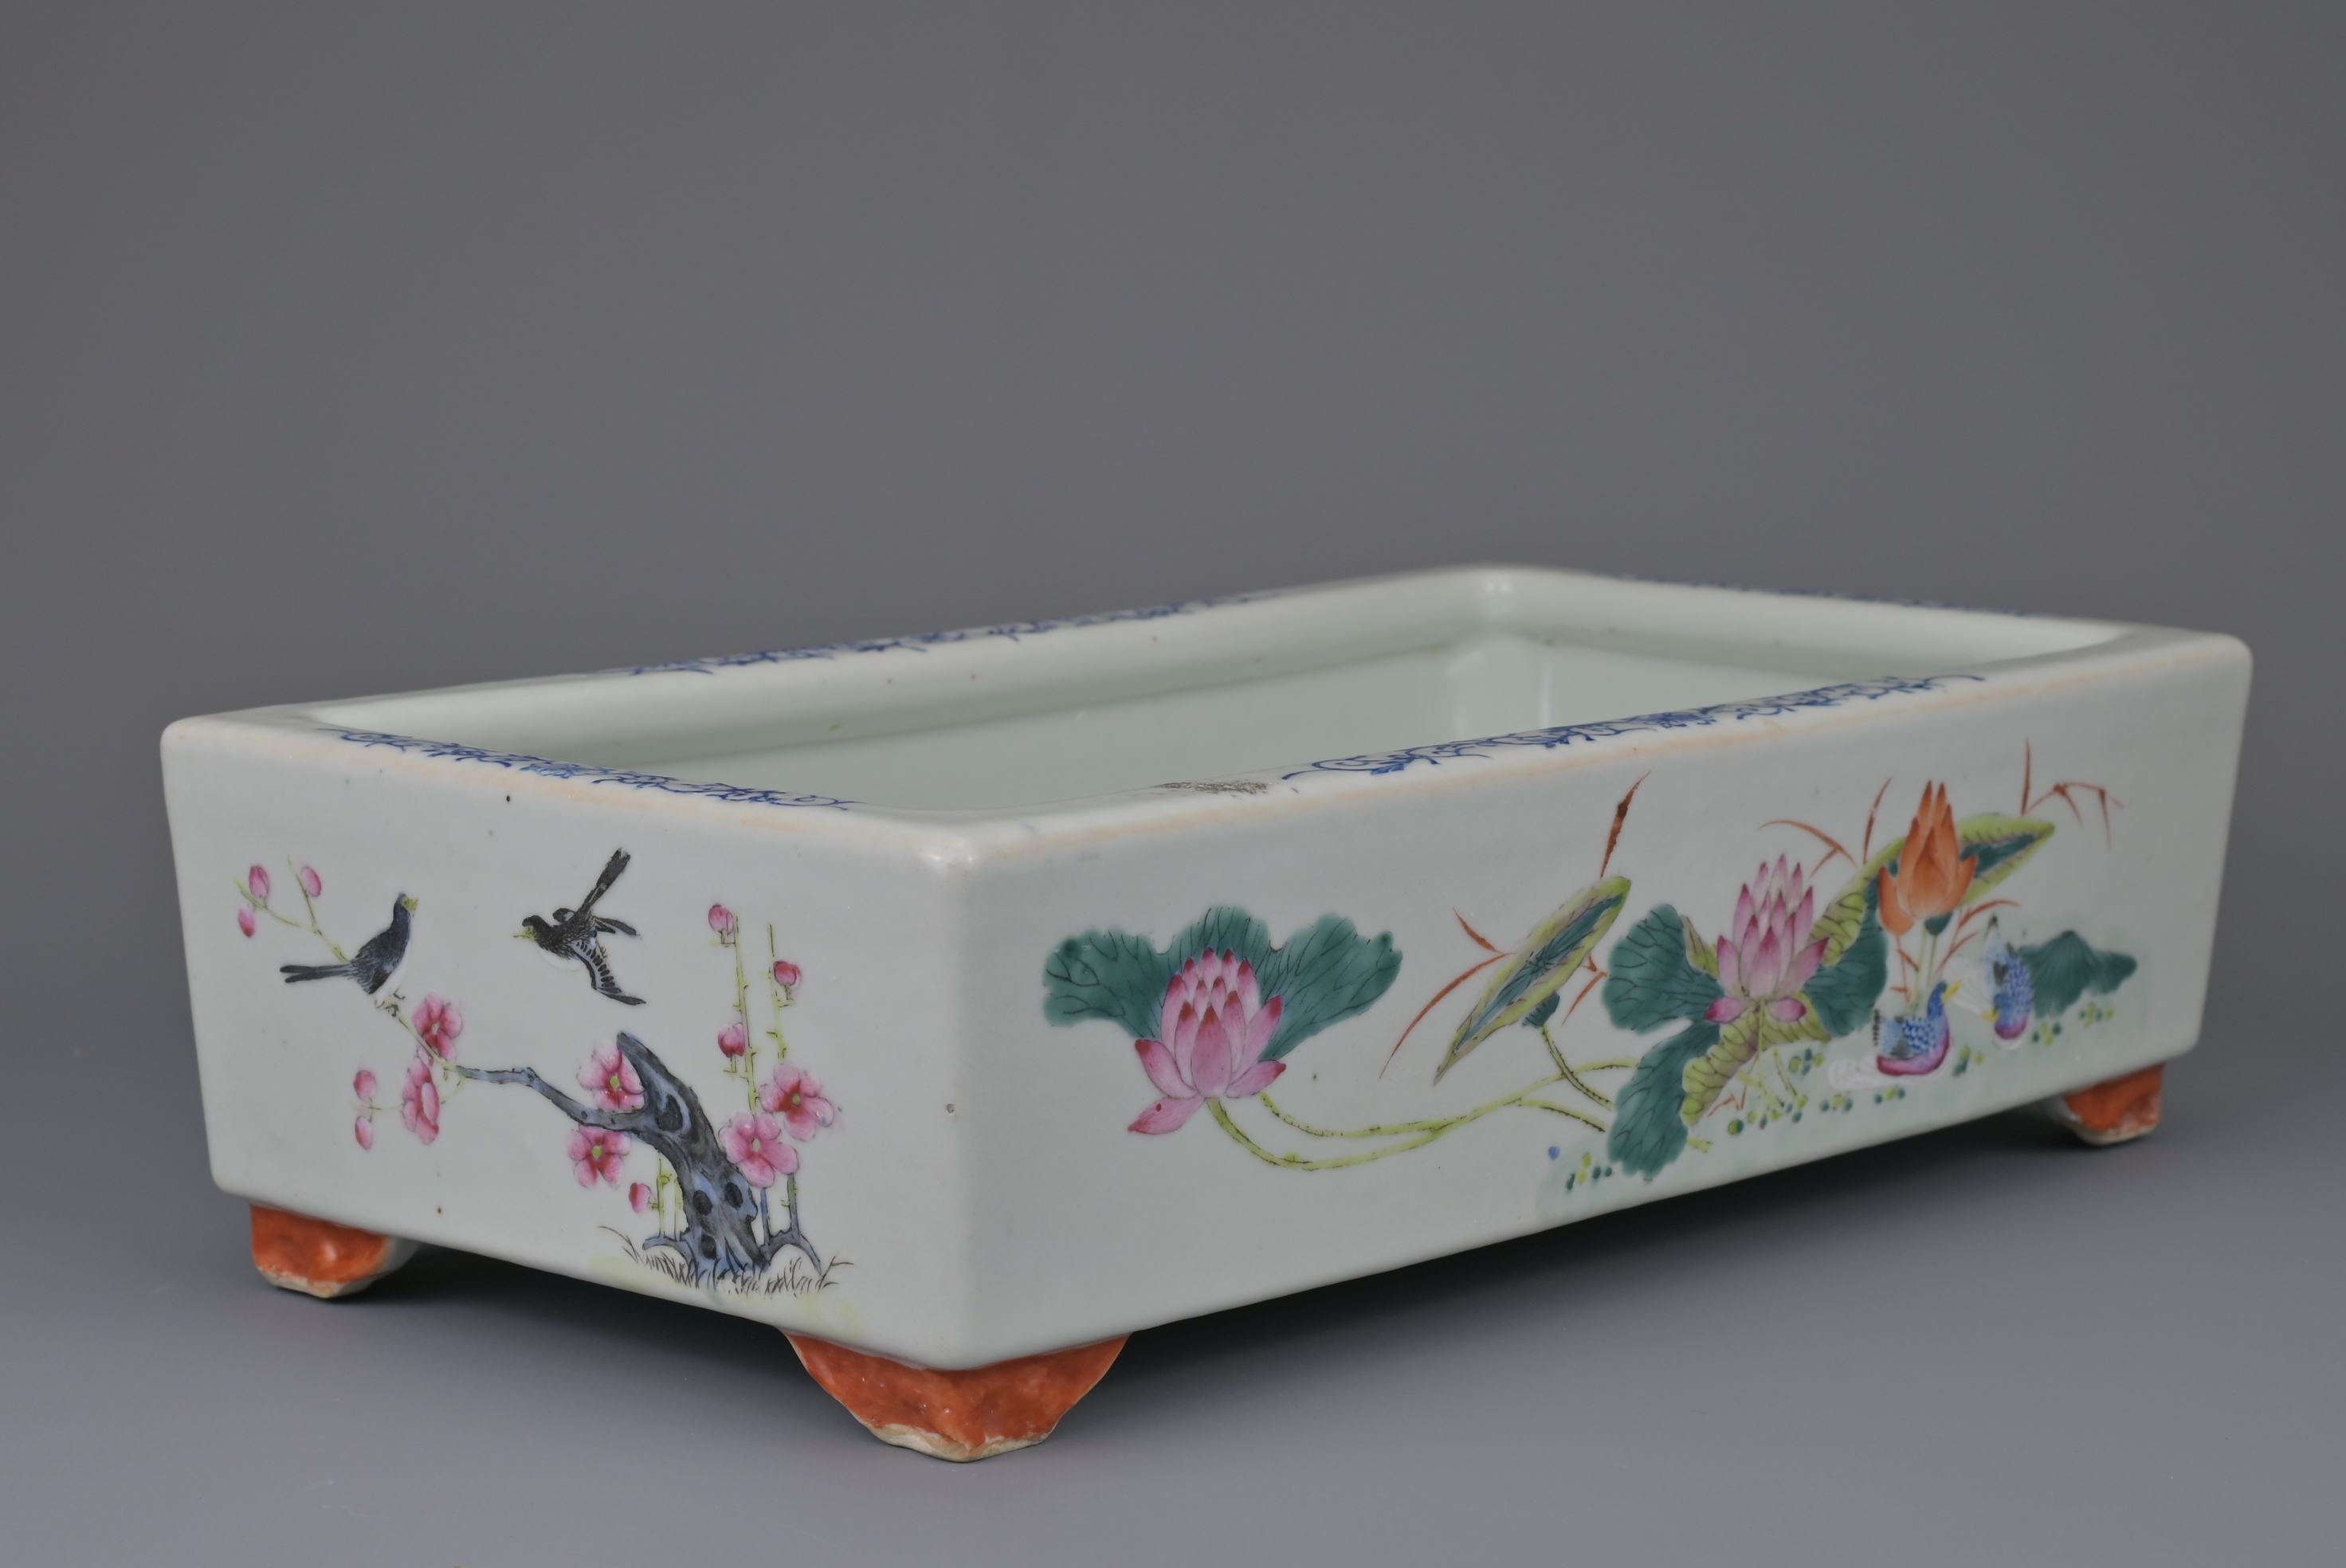 CHINESE FAMILLE ROSE PORCELAIN NARCISSUS BOWL, XIANFENG / TONGZHI PERIOD, MID 19th CENTURY - Image 4 of 9